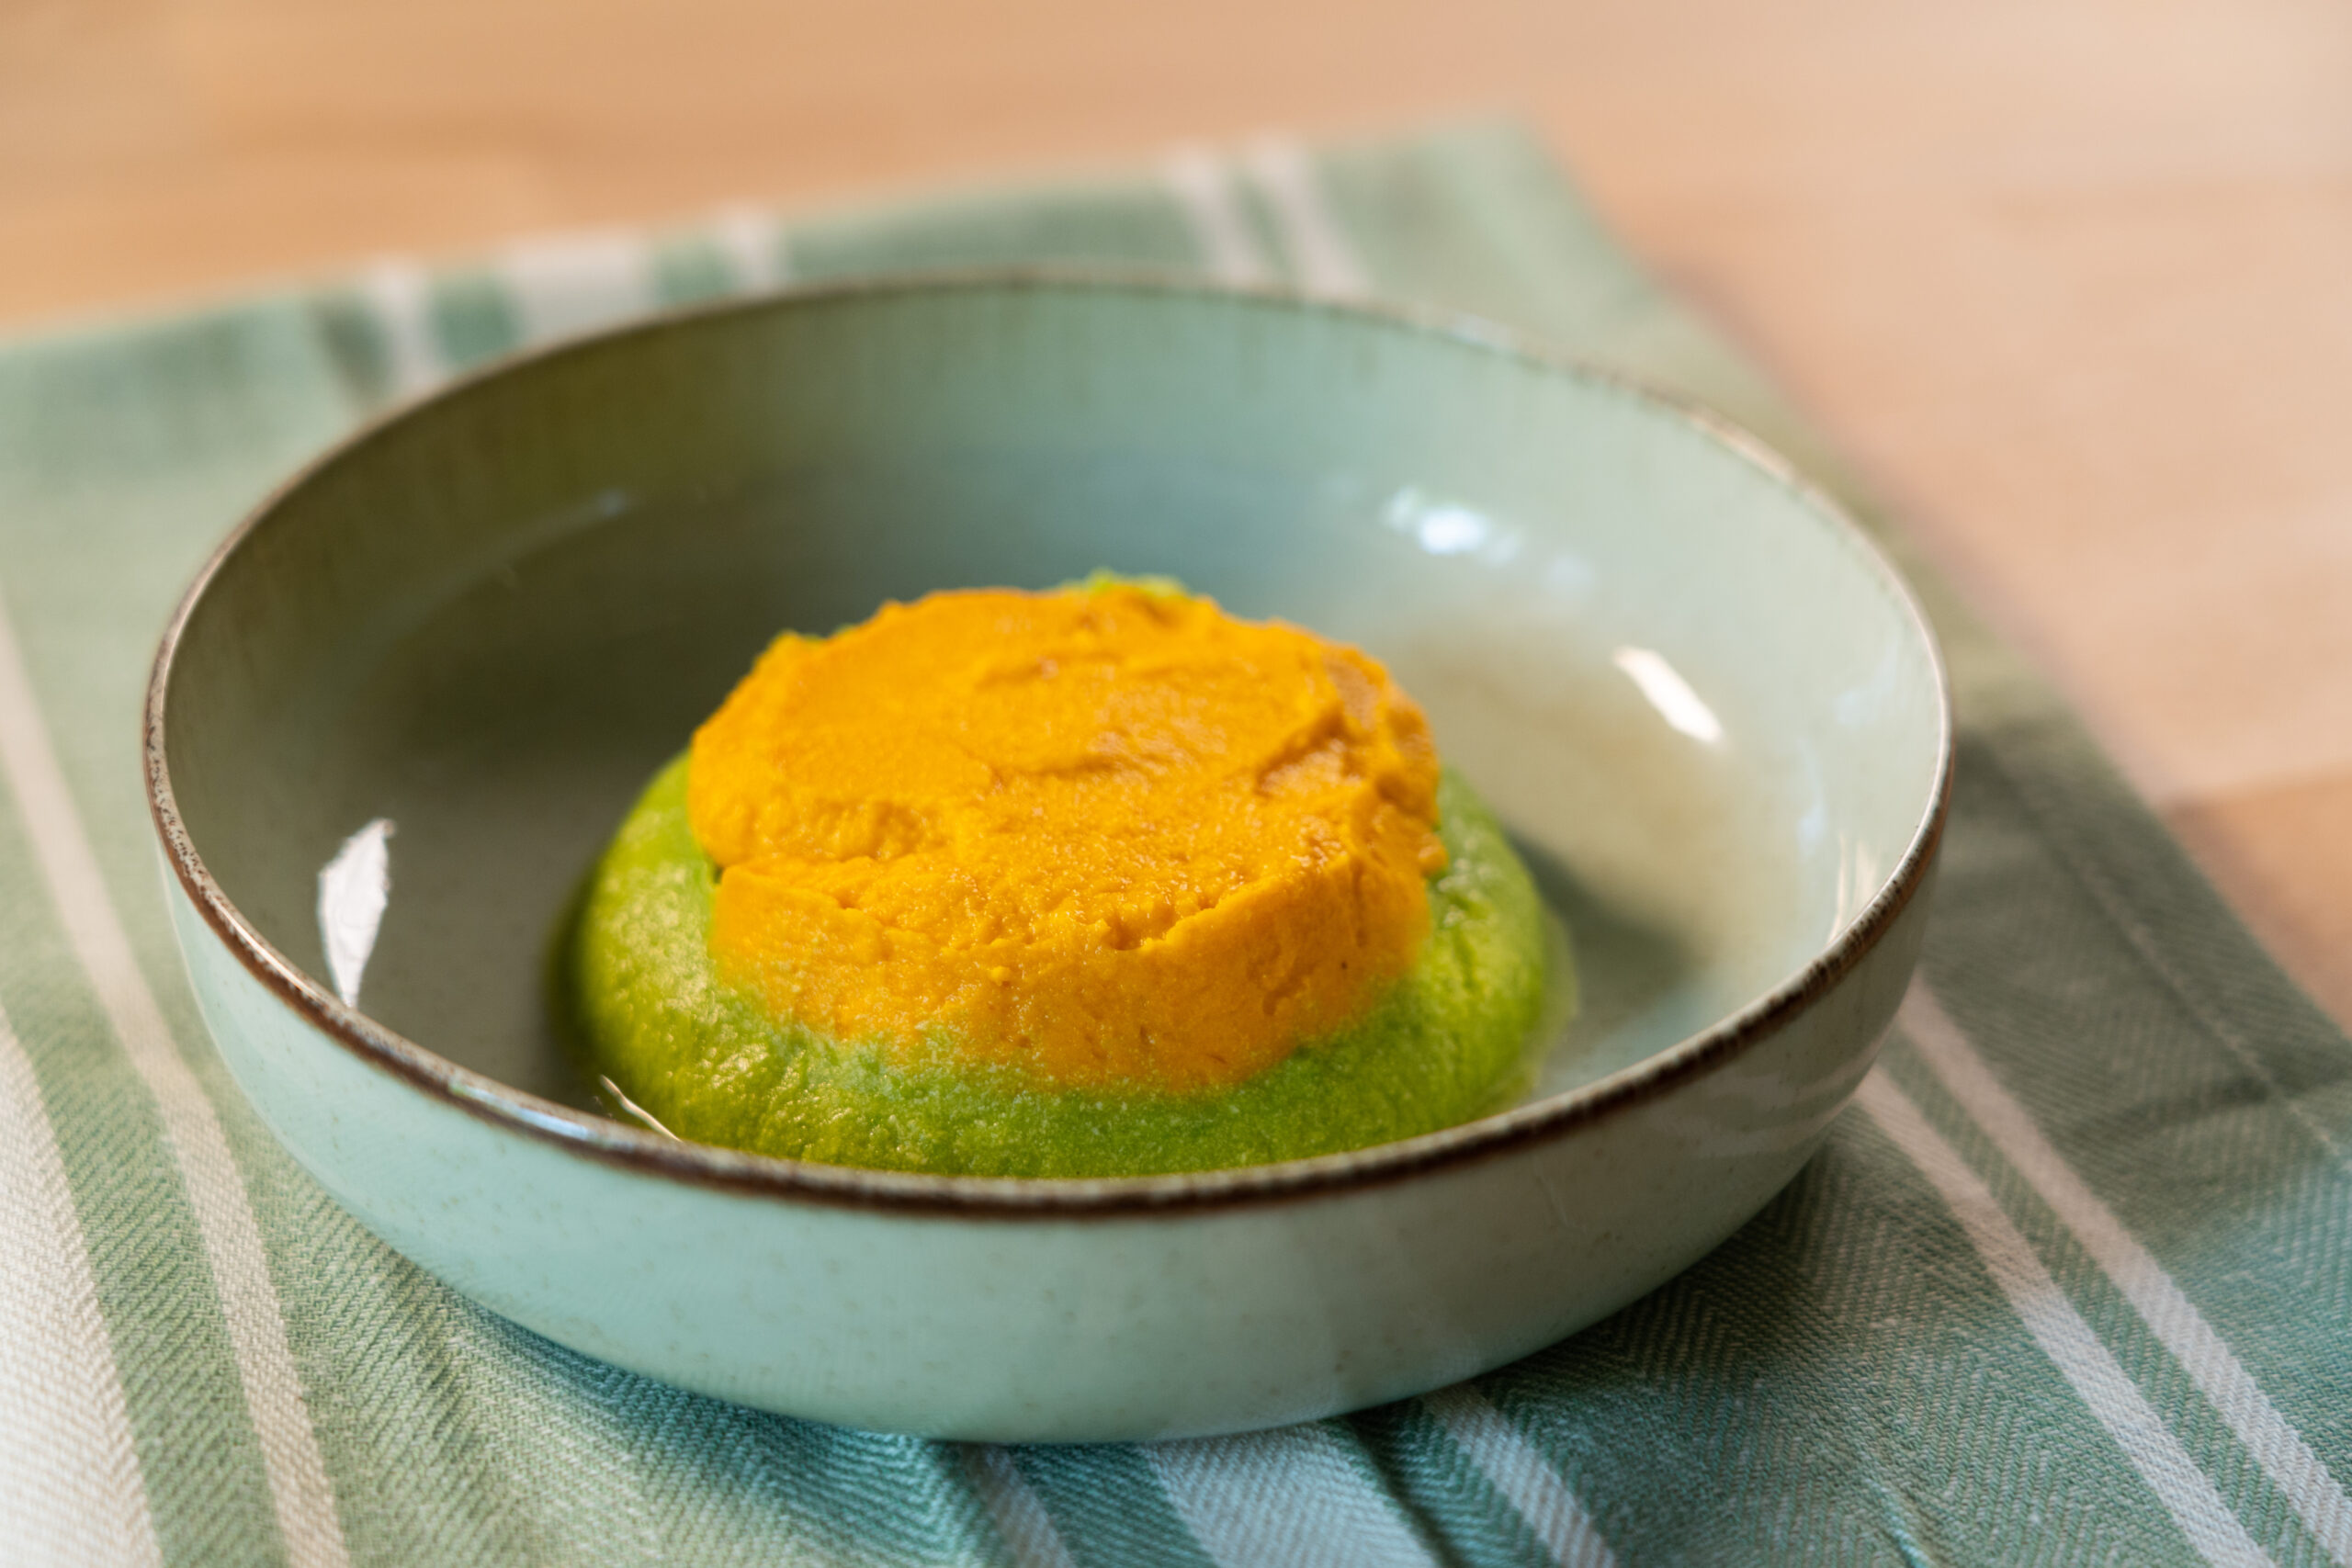 Pea and carrot purées with peanuts and egg